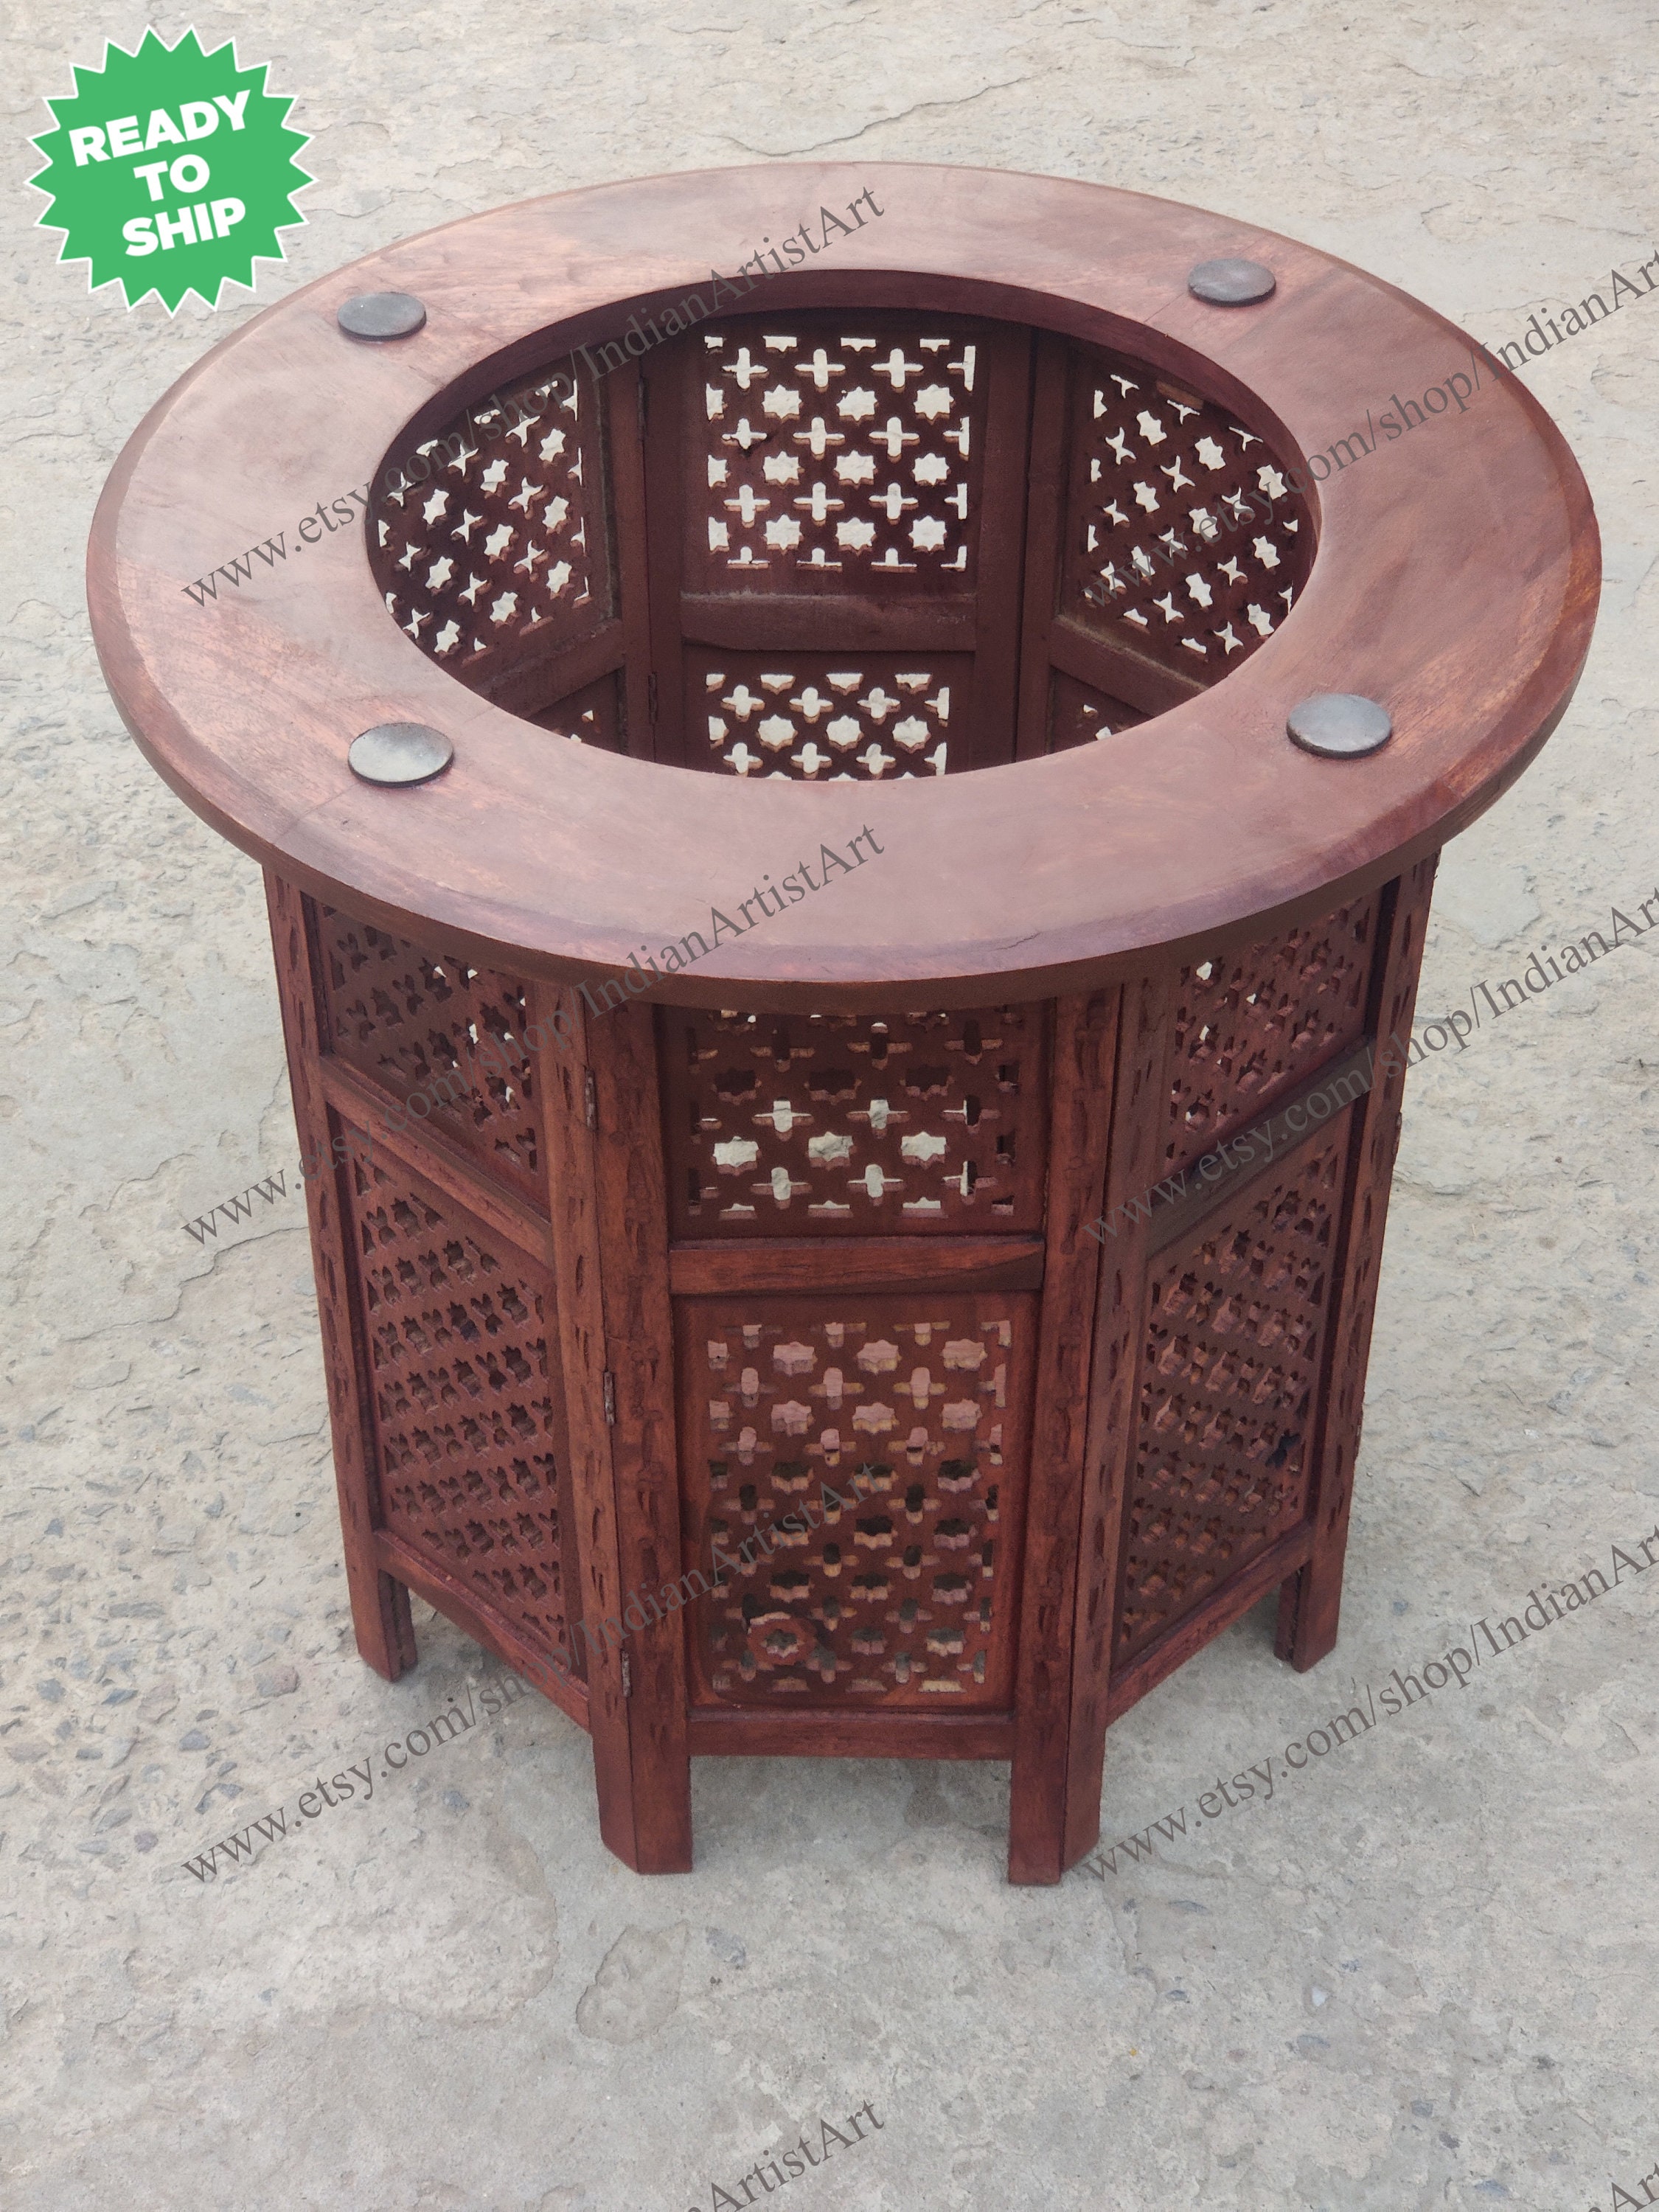 Sheesham Wood Carved Folding Table FAST SHIPPING IN 24 HOURS ITEM LOCATED IN USA 